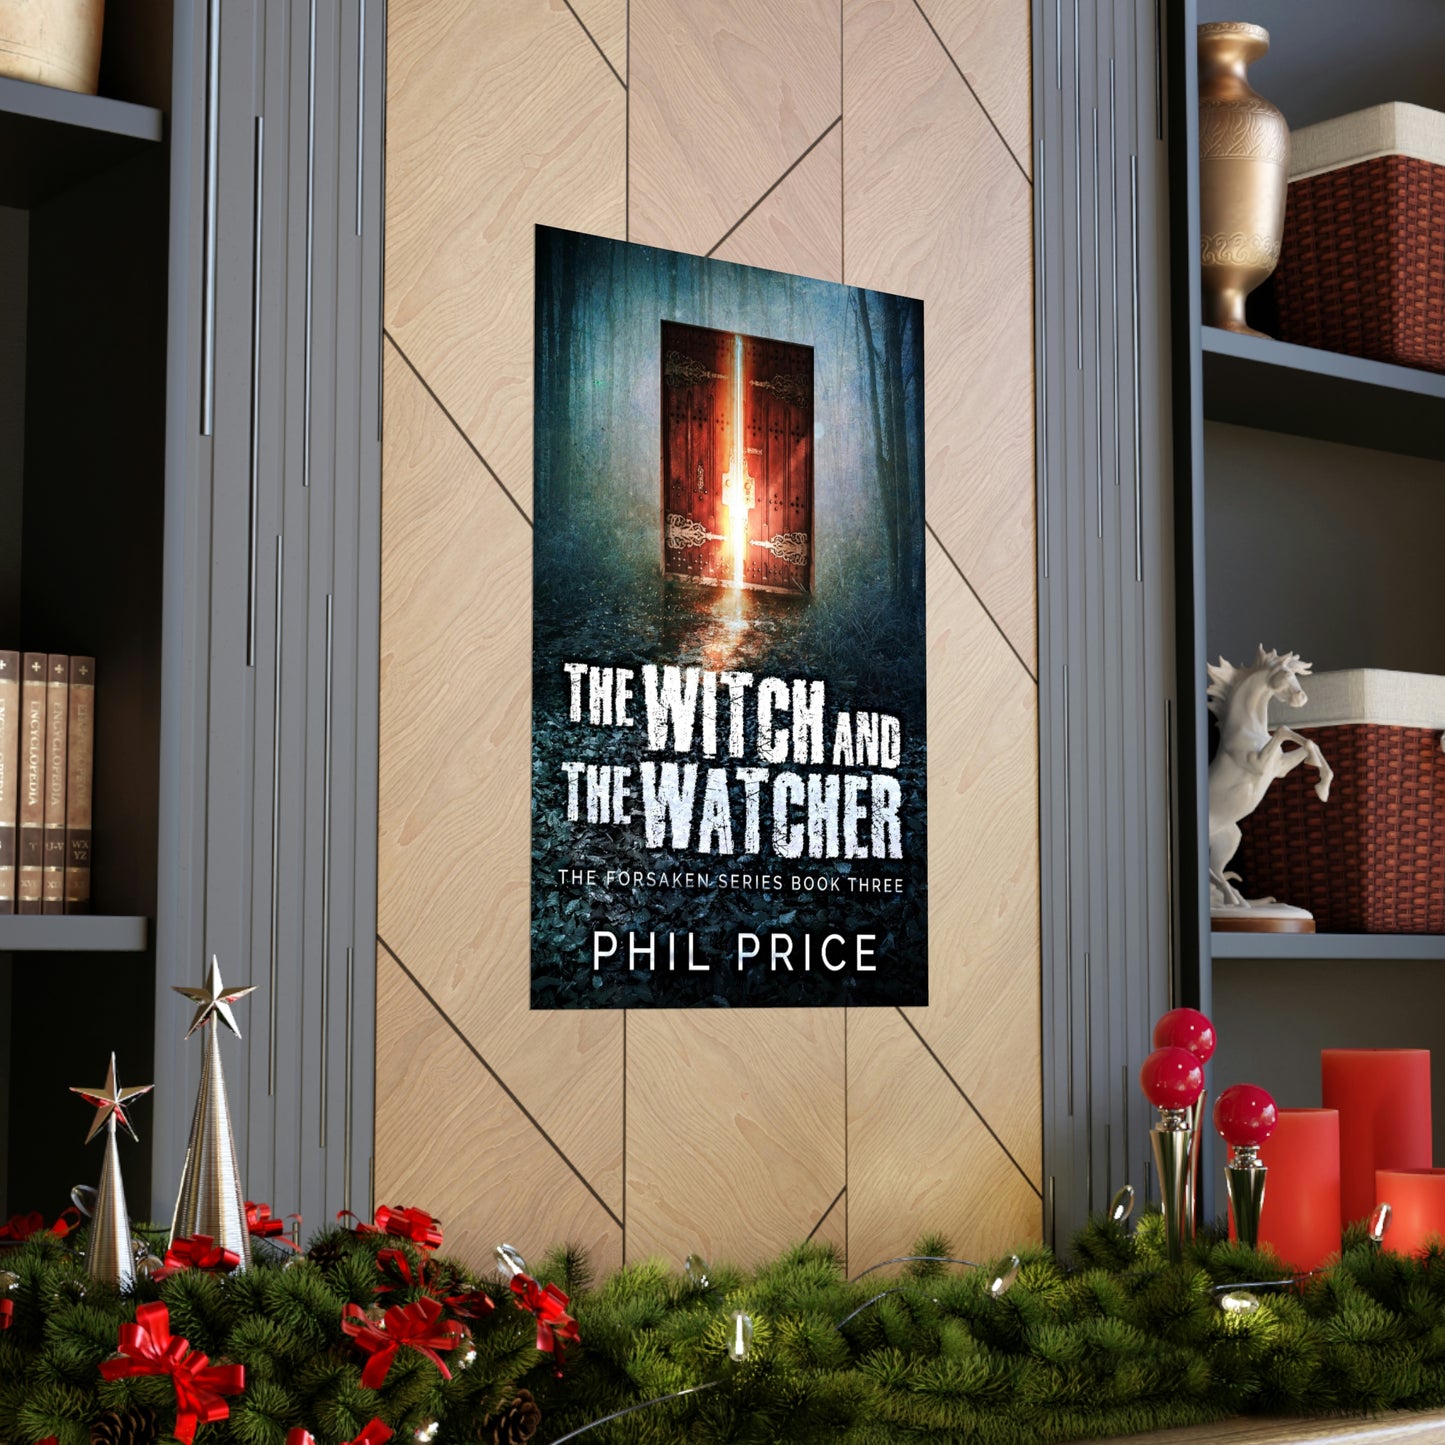 The Witch and the Watcher - Matte Poster